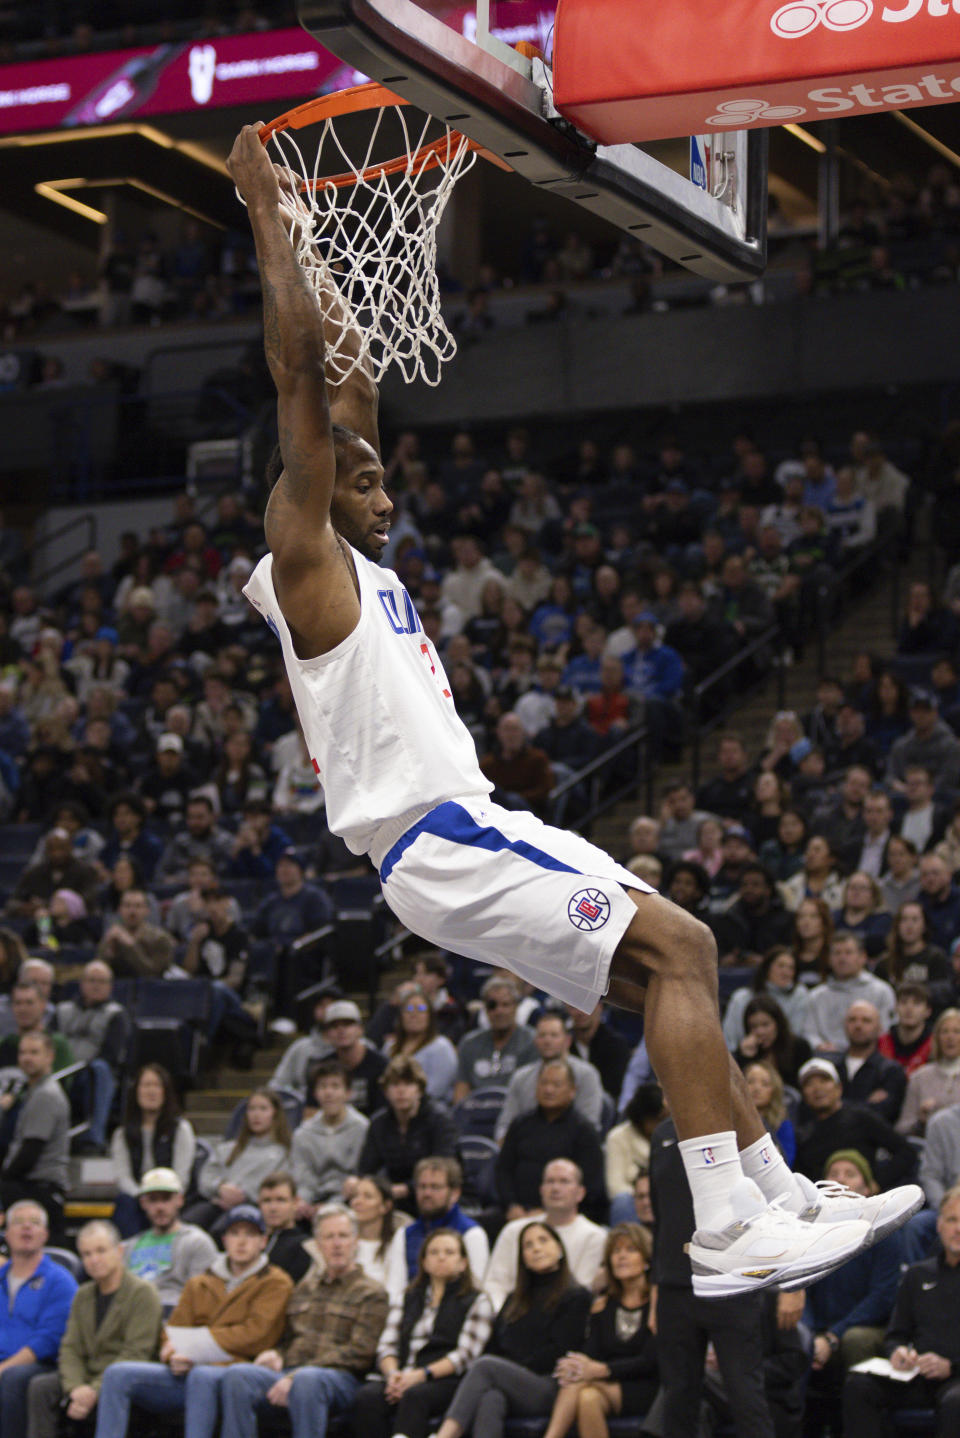 Los Angeles Clippers forward Kawhi Leonard hangs on the rim after a dunk during the first half of an NBA basketball game against the Minnesota Timberwolves, Sunday, Jan. 14, 2024, in Minneapolis, Minn. (AP Photo/Bailey Hillesheim)